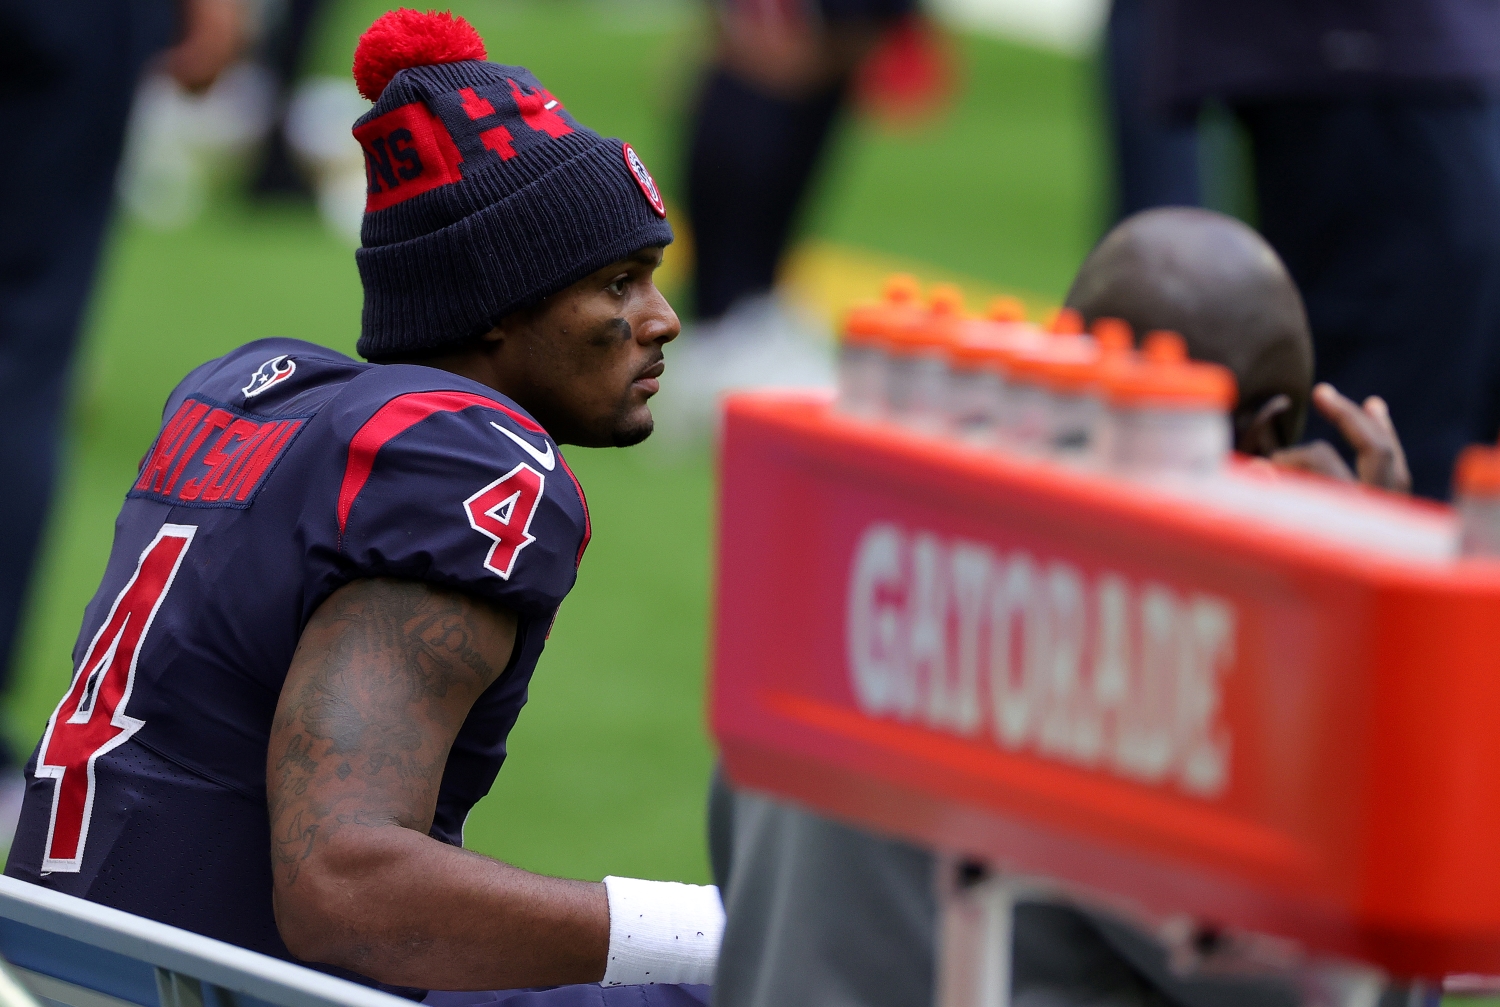 Deshaun Watson sits on the bench during a Houston Texans game.